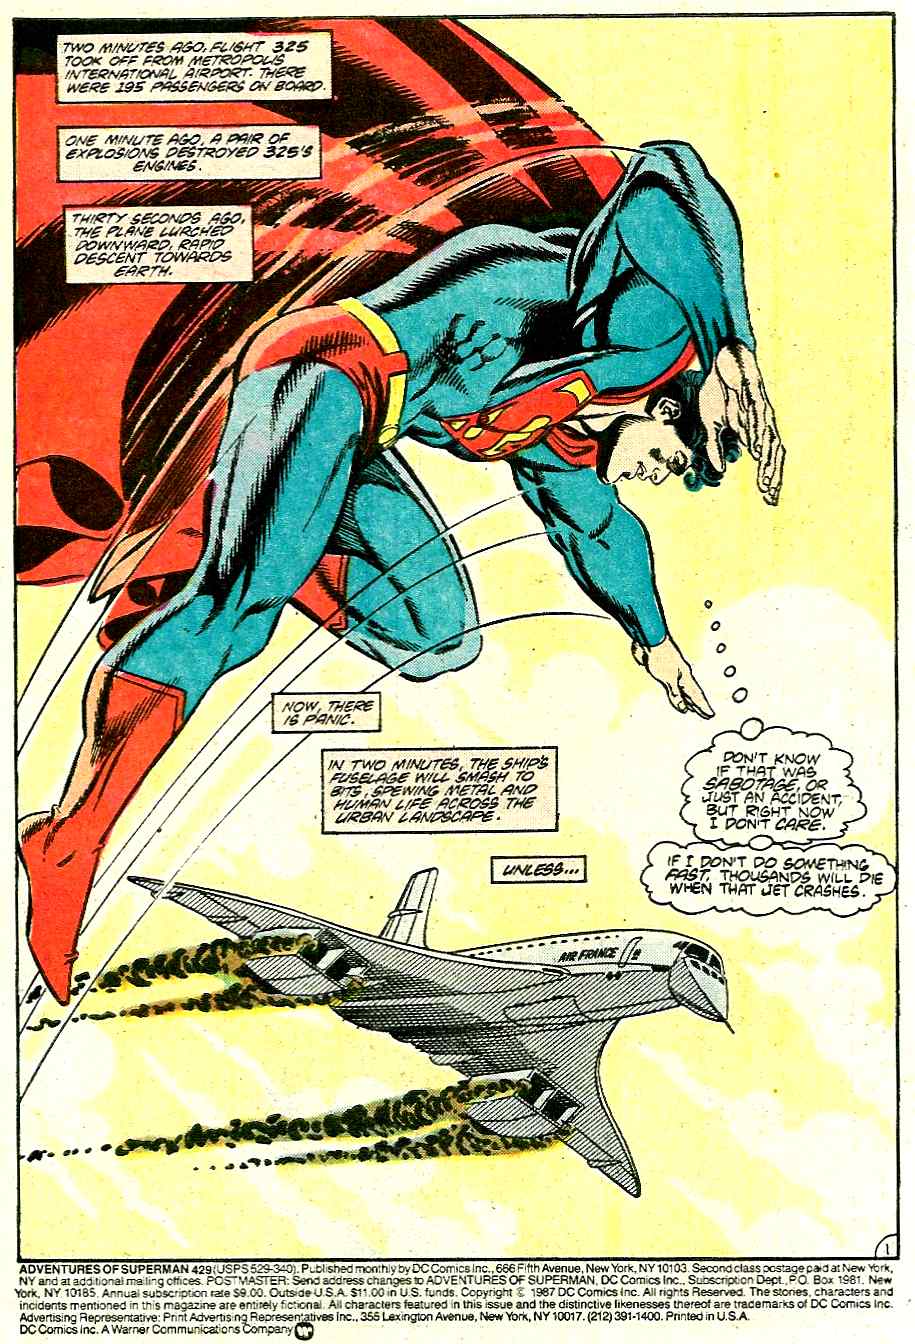 Adventures of Superman (1987) 429 Page 1